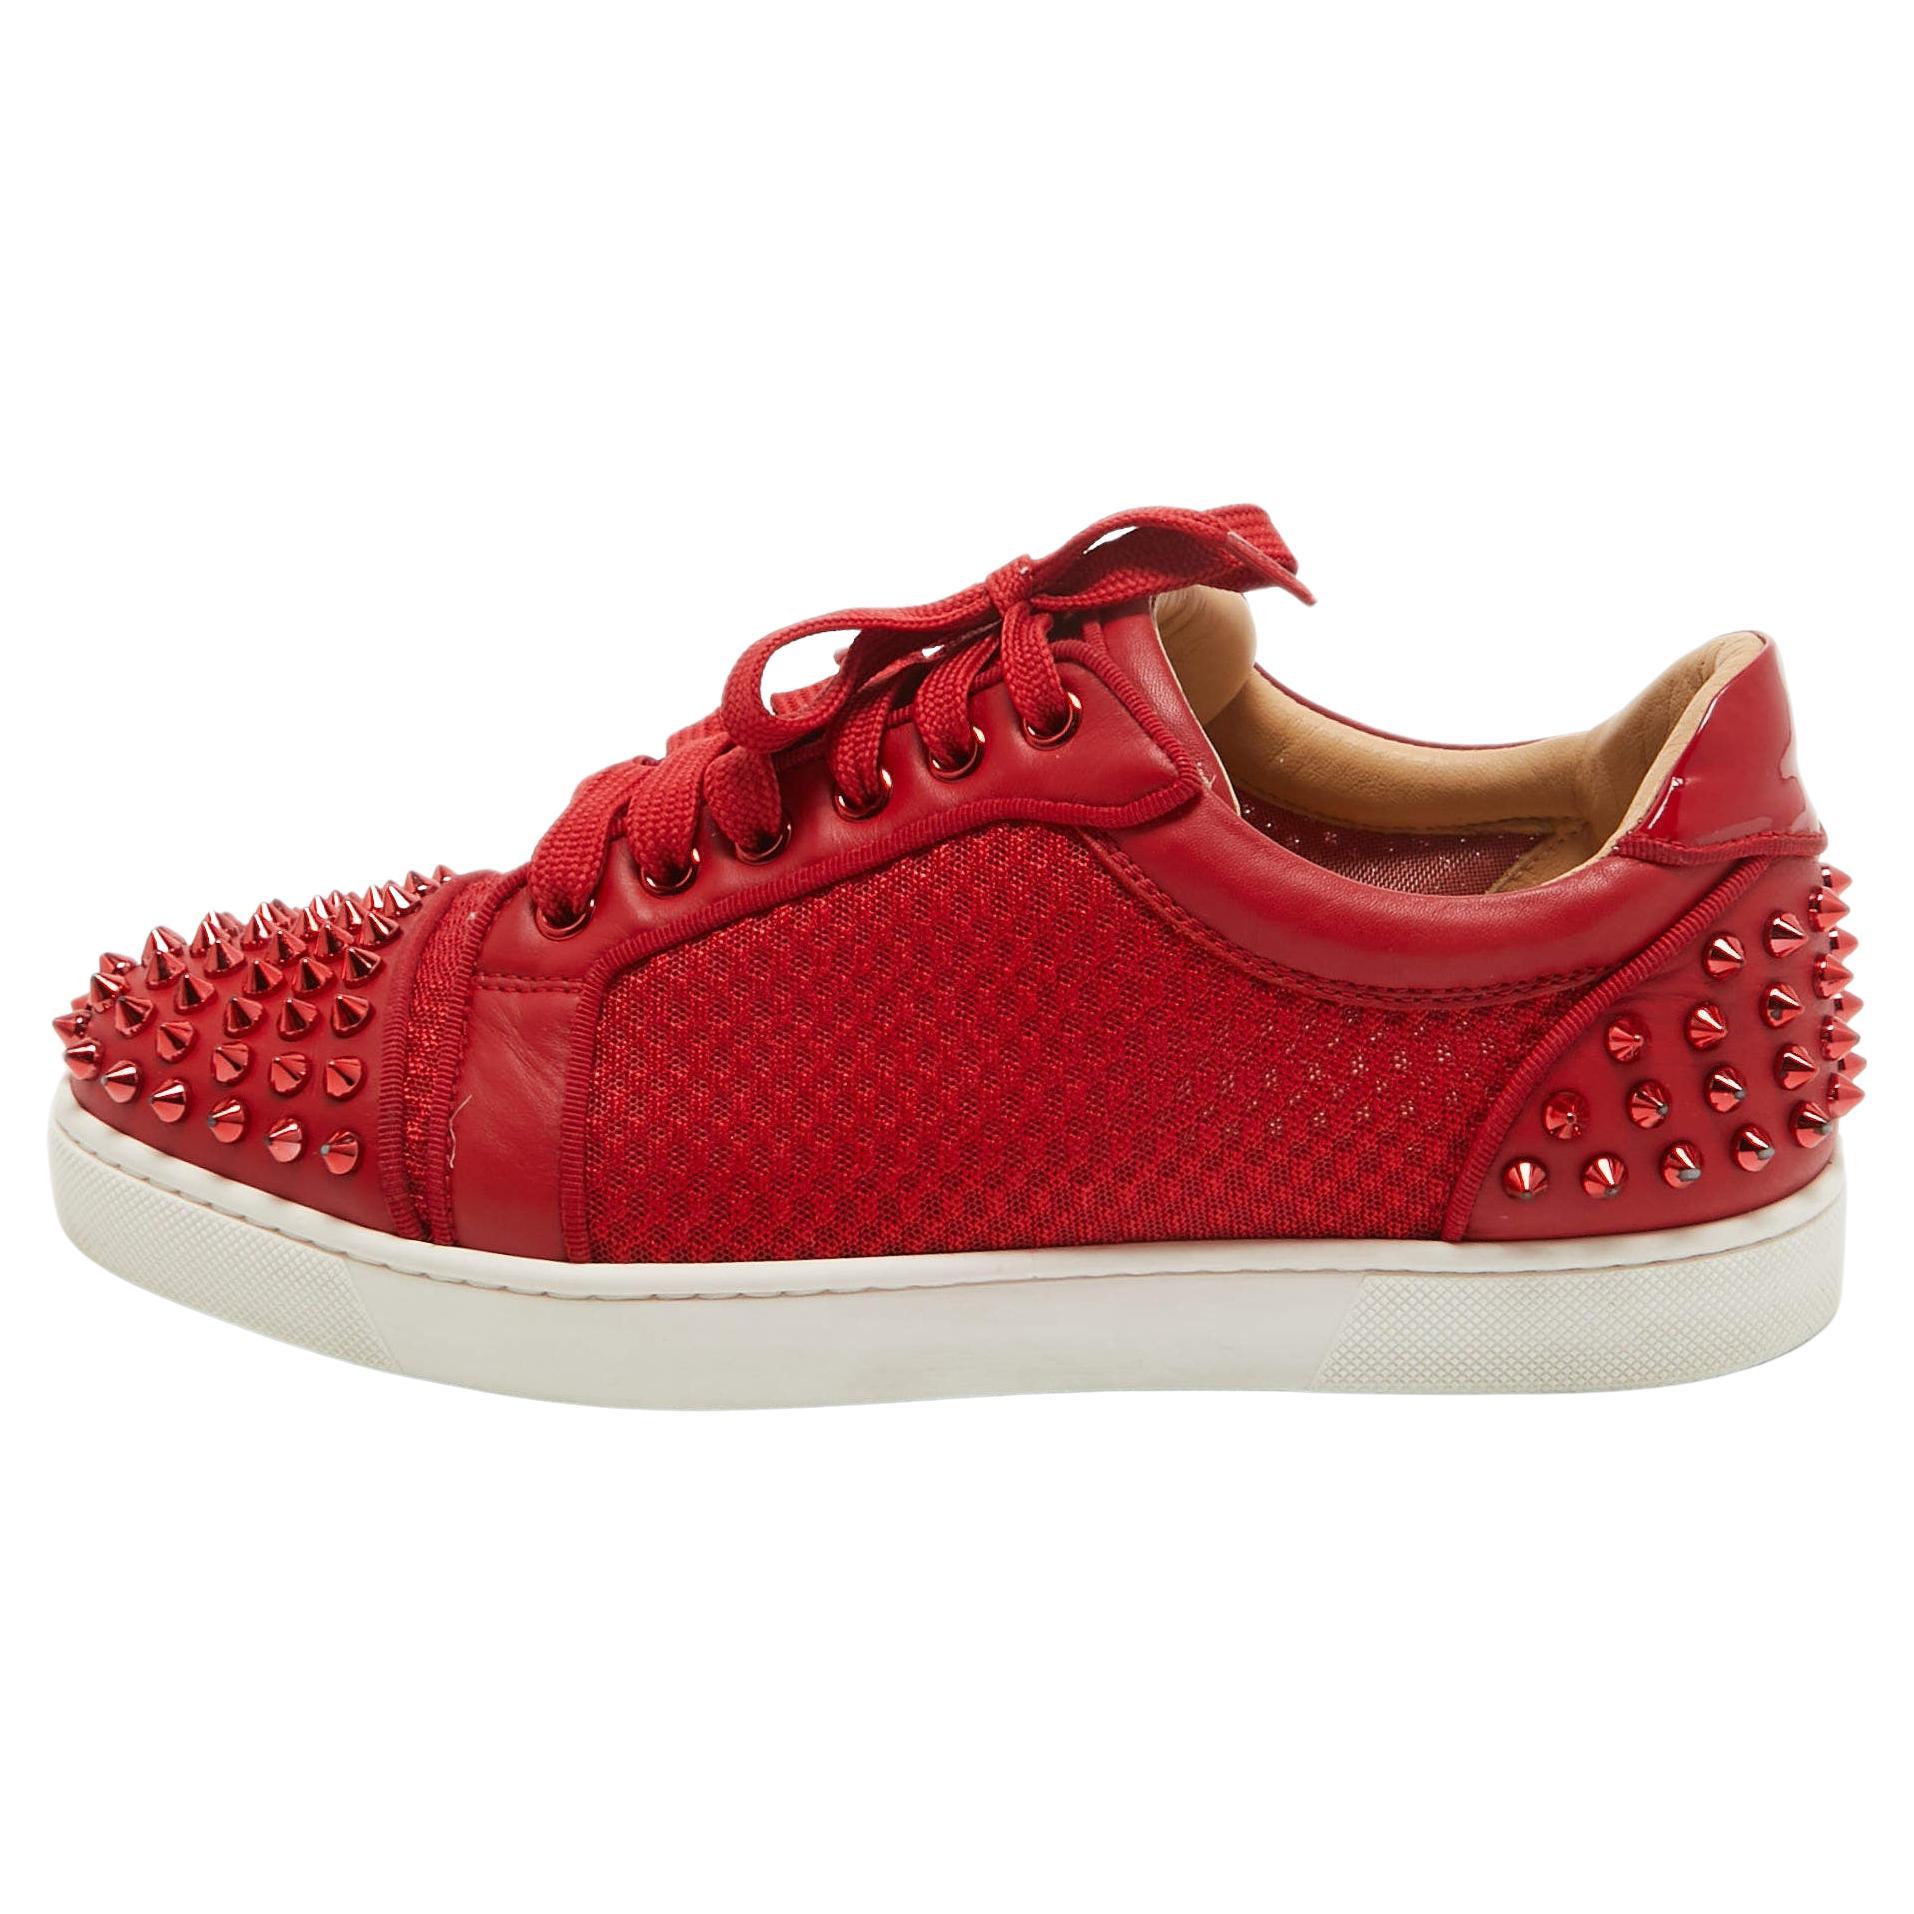 Christian Louboutin Red Mesh and Leather Vieira Spikes Low Top Sneakers Size 39